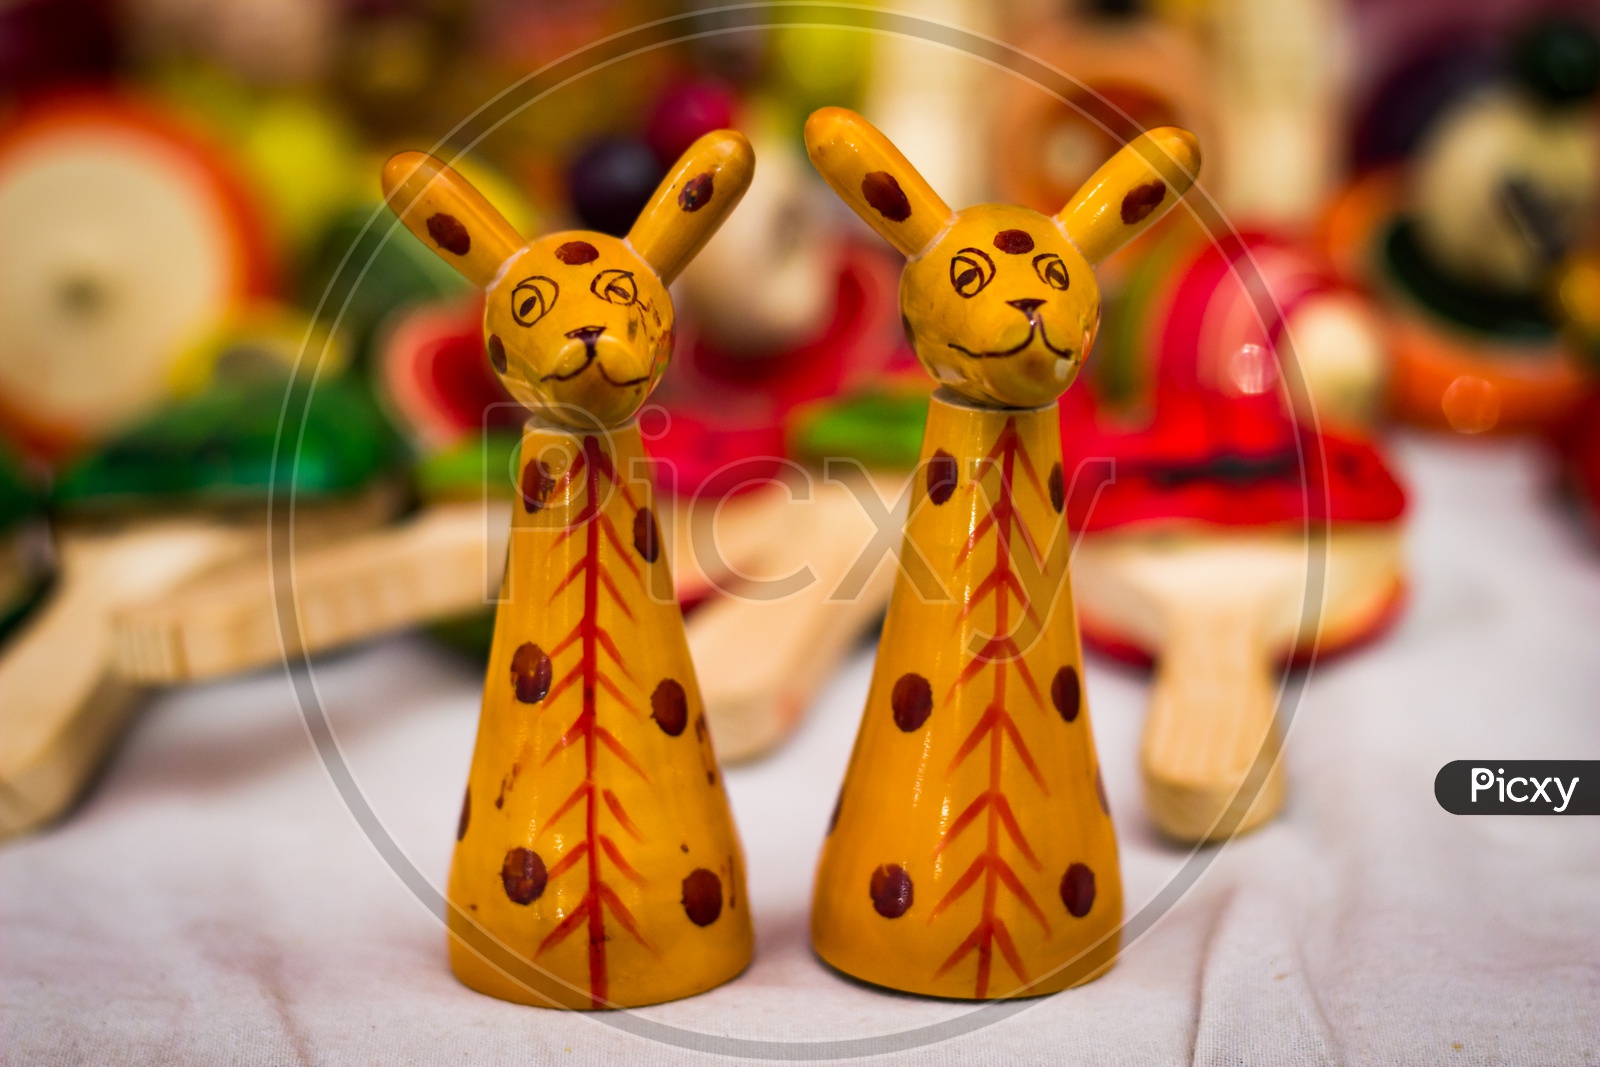 Two Yellow Wooden Giraffe Figure Vintage Toy